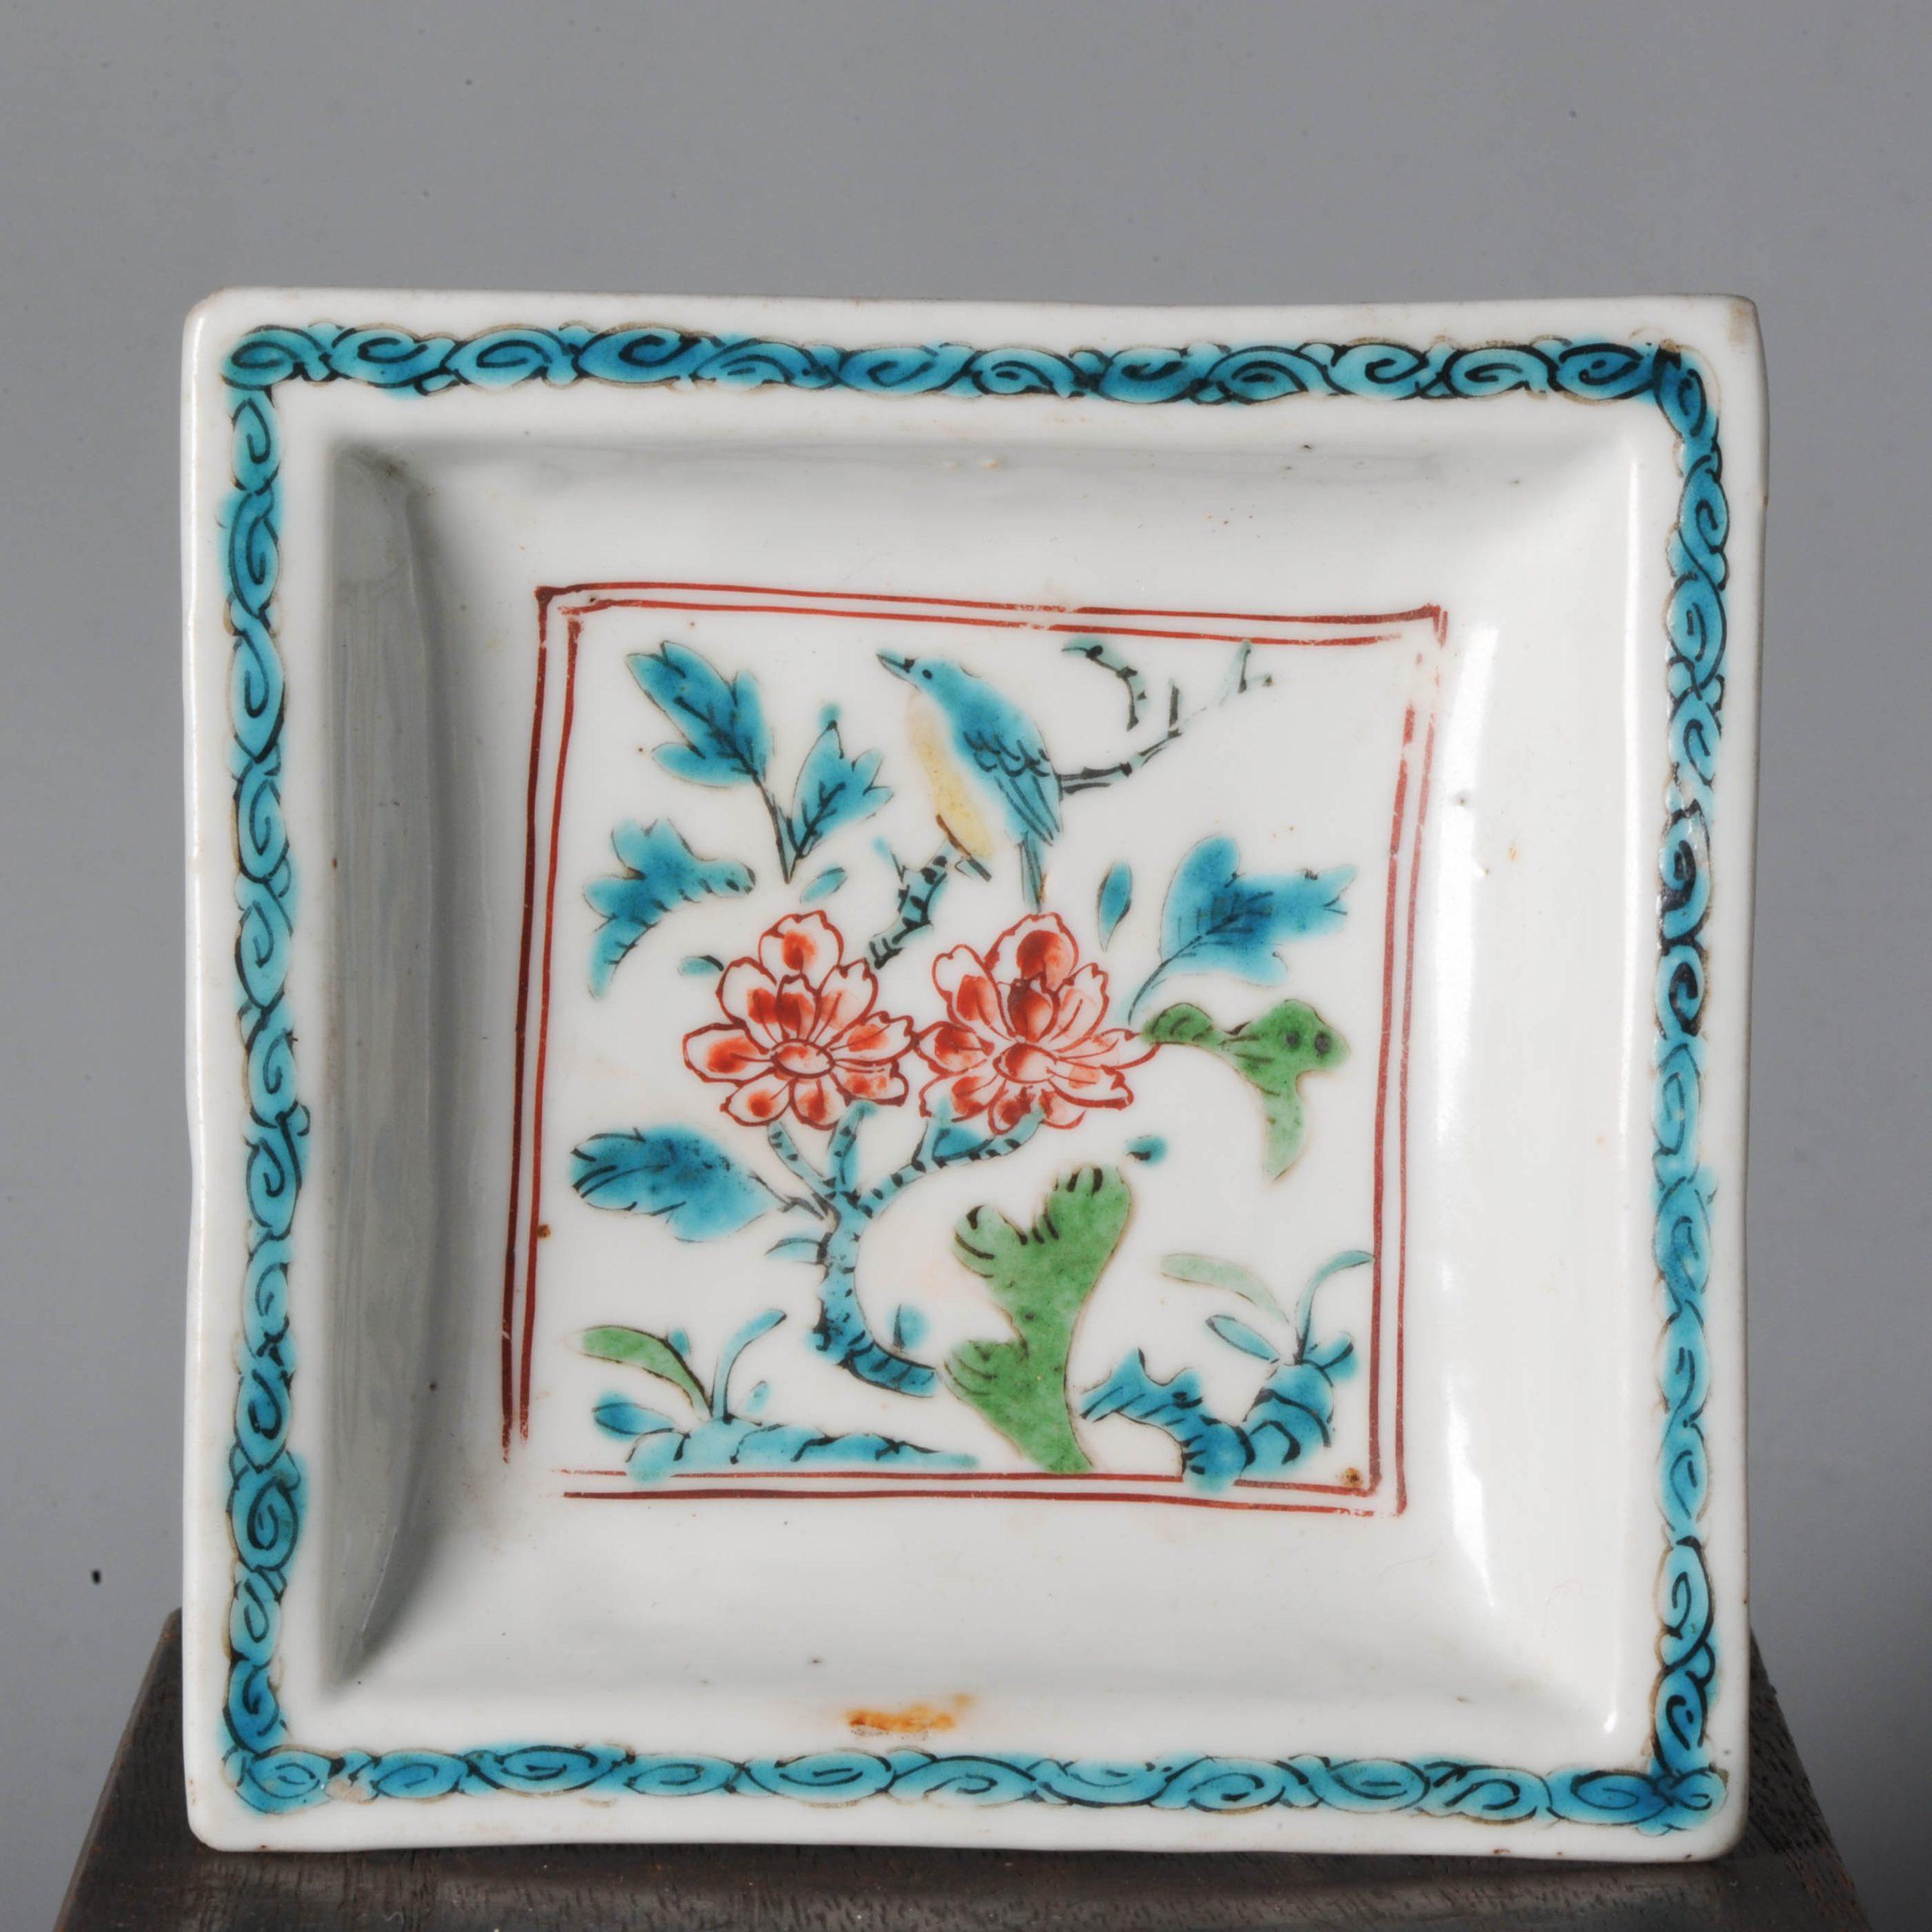 Unusual 17th C. Chinese Porcelain Ming Period Square Dish Turquoise Bird Flowers For Sale 4